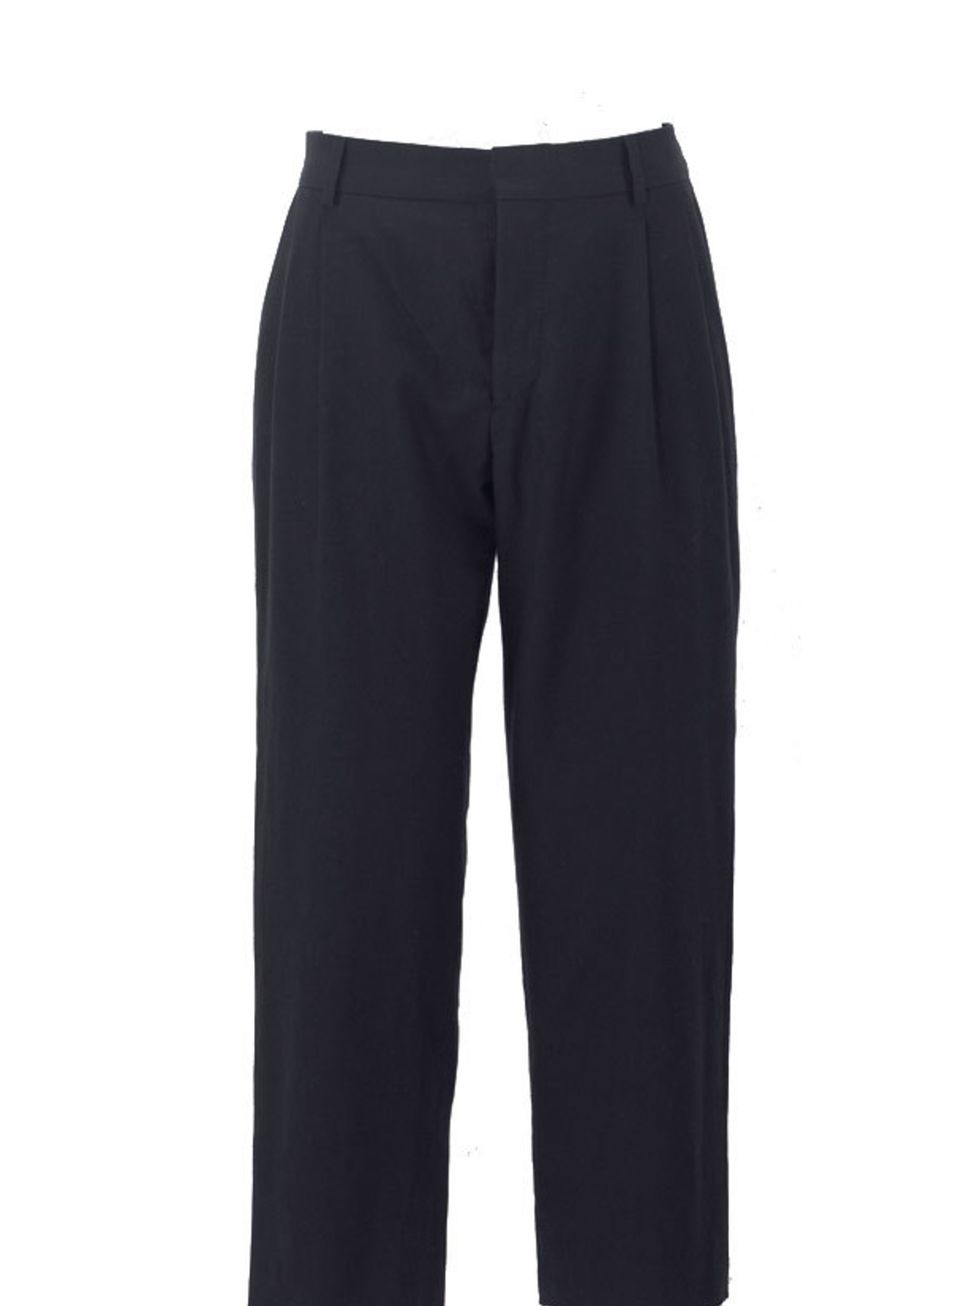 <p>Margaret Howell dark navy trousers,£345, for stockists details call 020 7009 9009 or visit <a href="www.margarethowell.co.uk">www.margarethowell.co.uk</a></p>